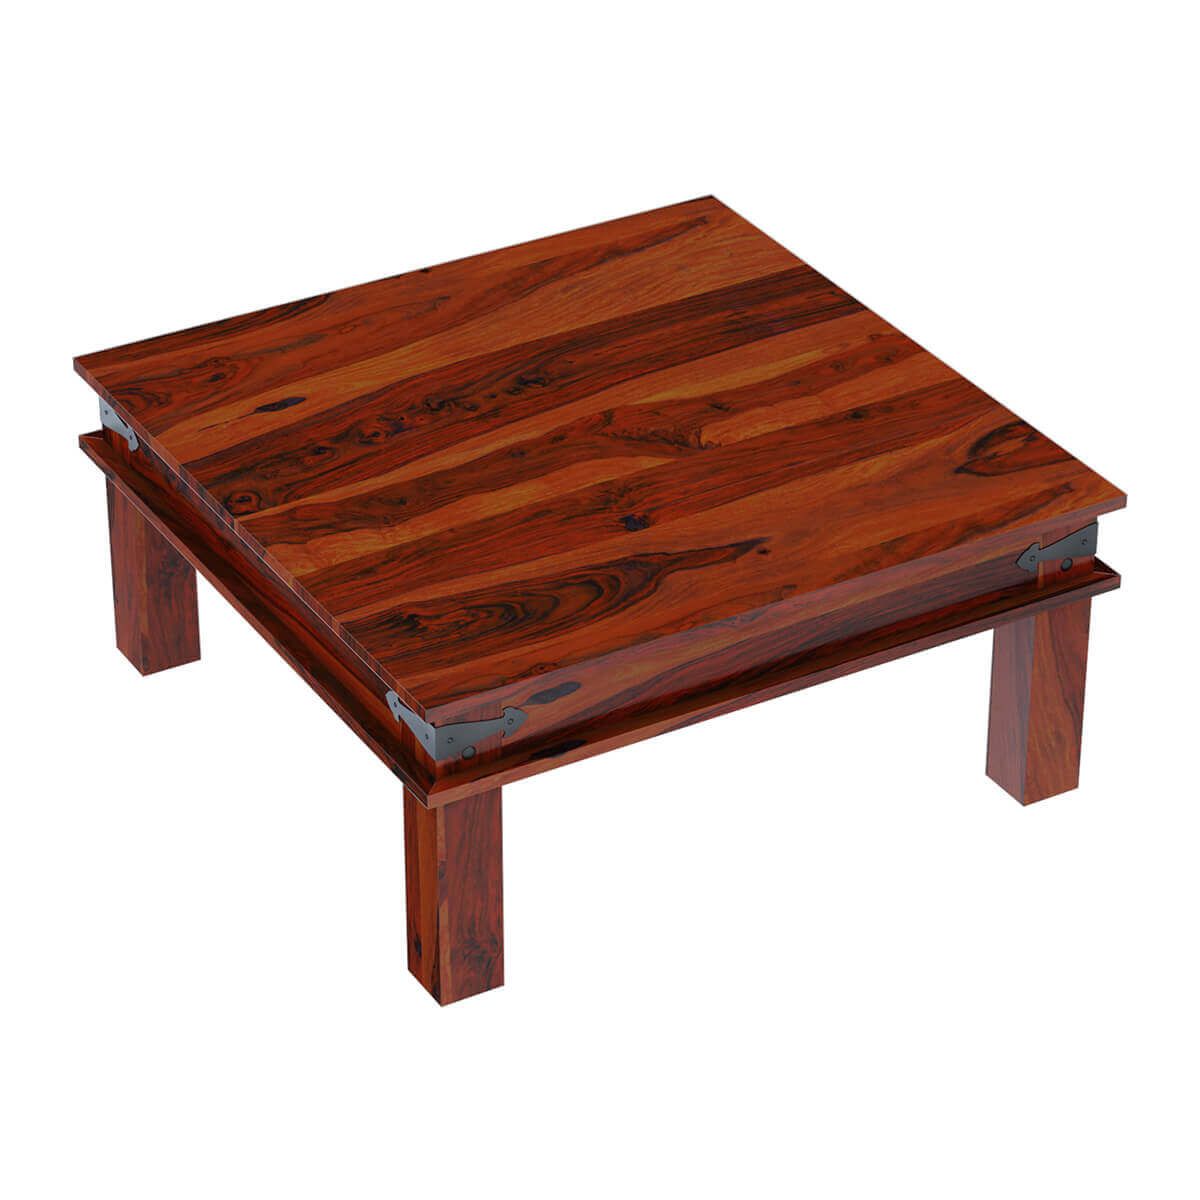 Altamont Transitional Solid Wood Square Coffee Table Intended For Smoke Gray Wood Square Coffee Tables (View 2 of 15)